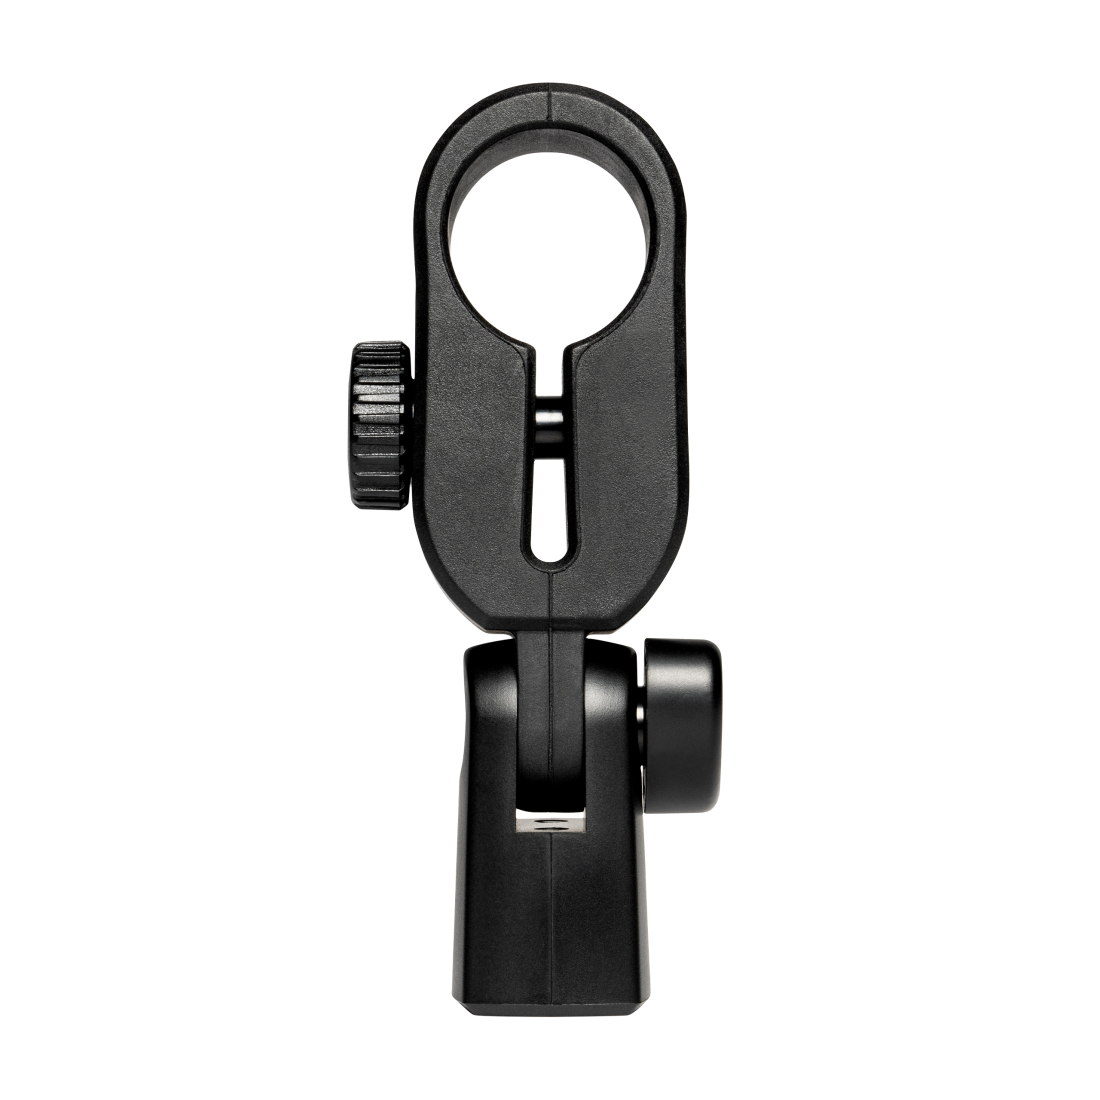 DTP 40 MTS Rubber Microphone Mount